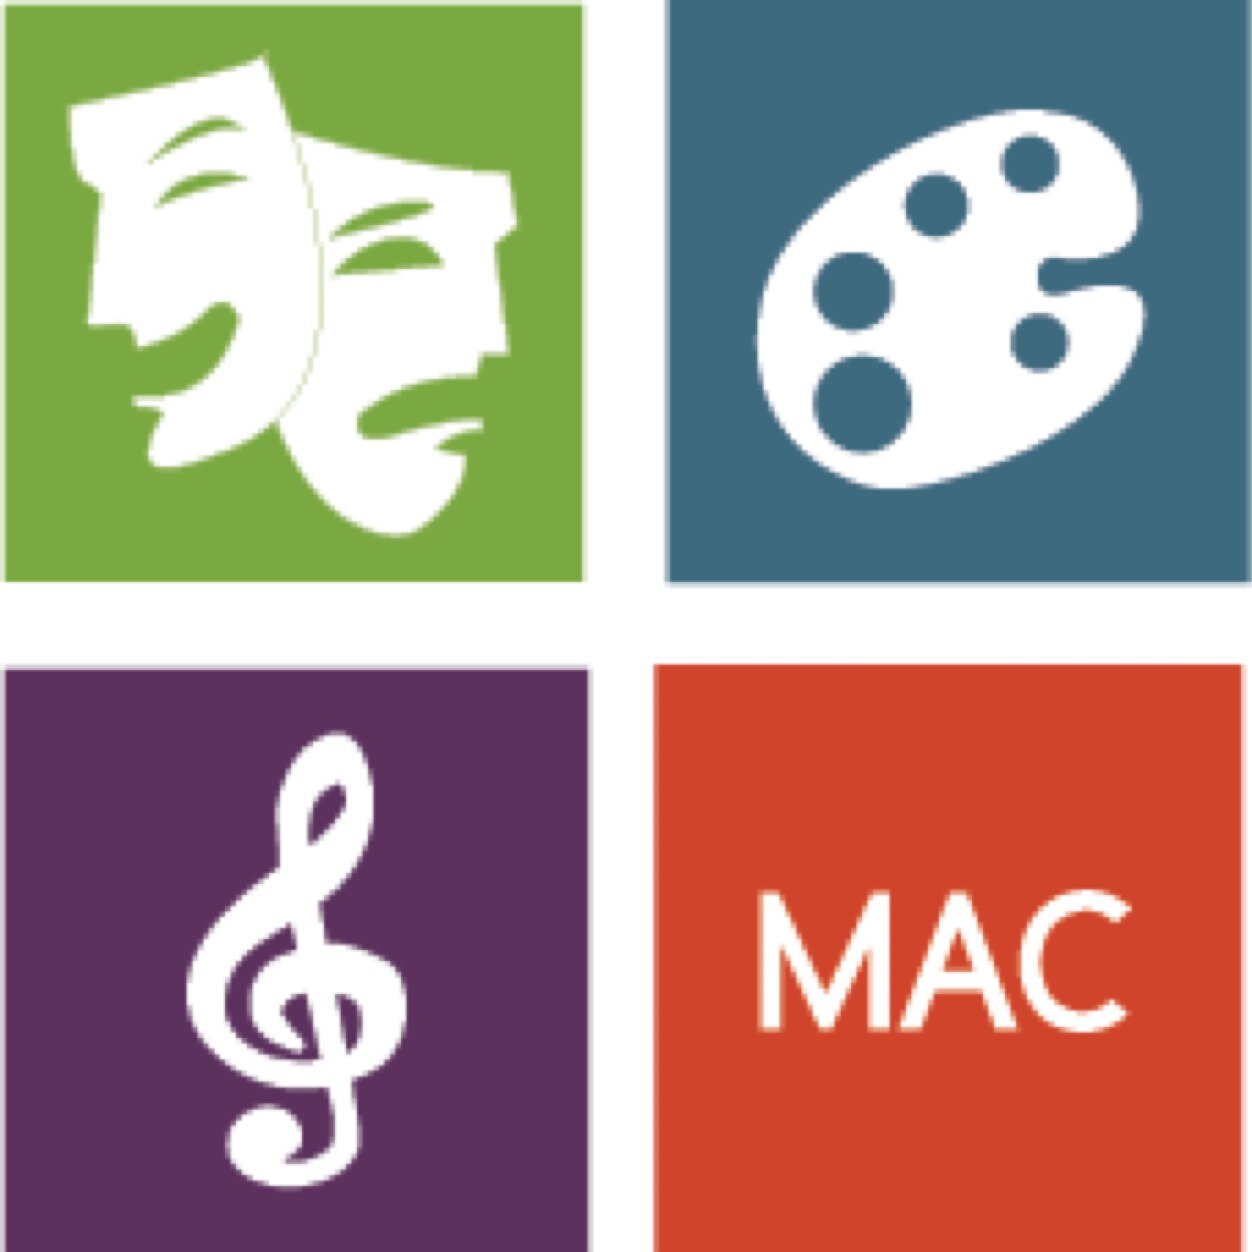 The Midvale Arts Council from Midvale, Utah is dedicated to bringing performing arts to our little slice of heaven